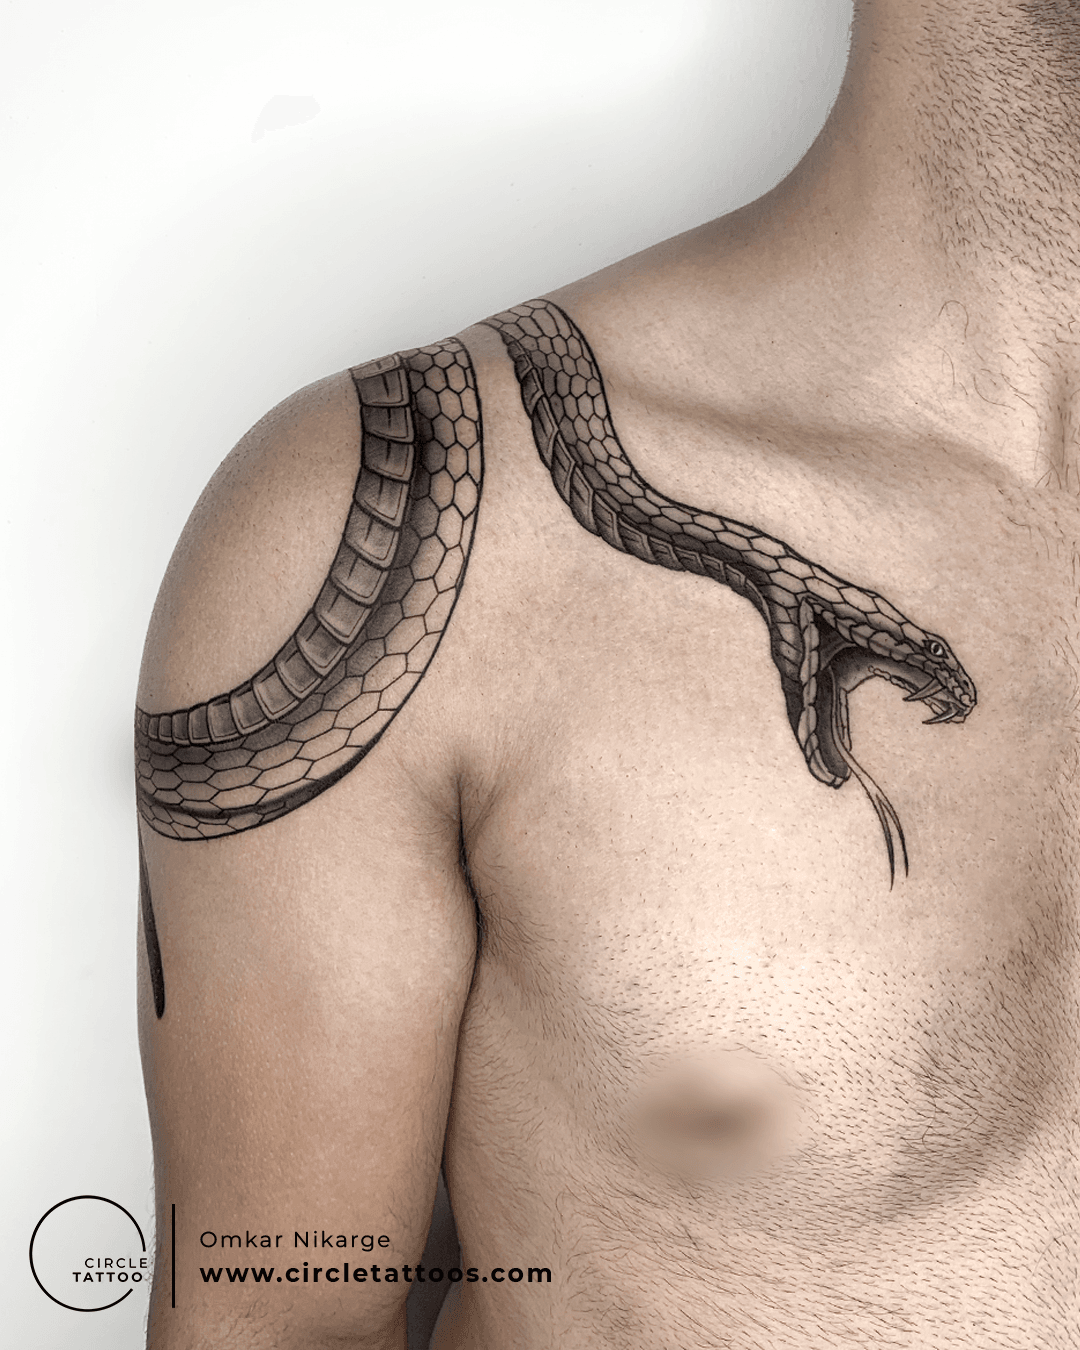 Snake tattoo located on the chest, done in